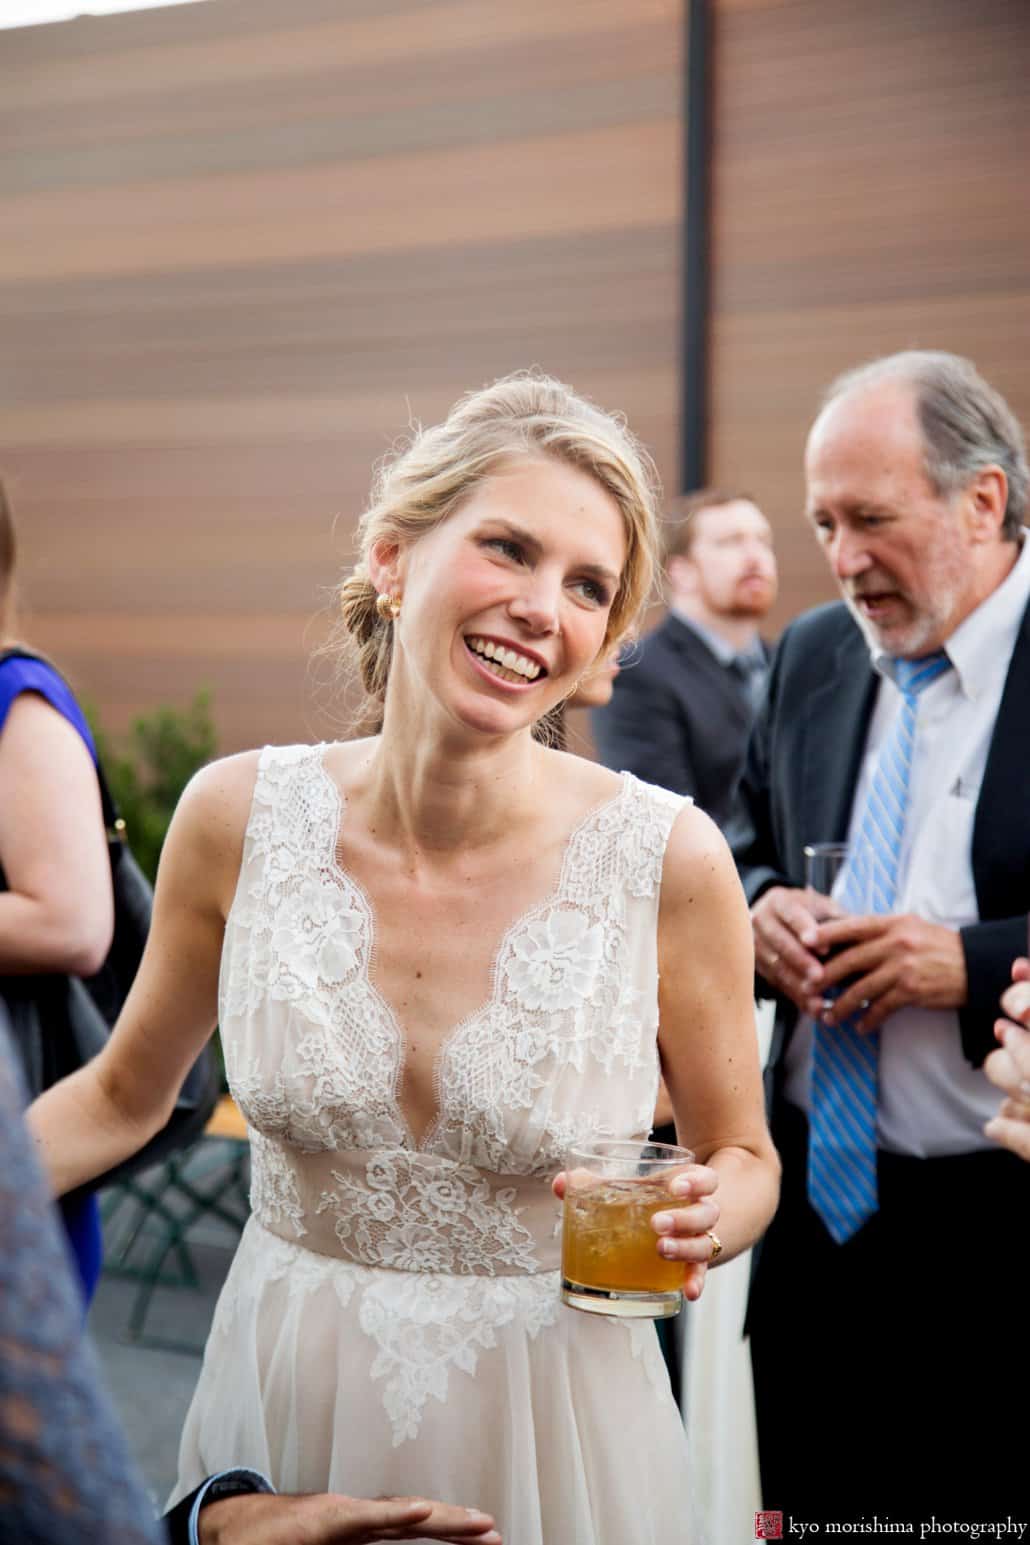 Bride smiles during outdoor cocktail hour at Green Building wedding in Brooklyn photographed by Kyo Morishima